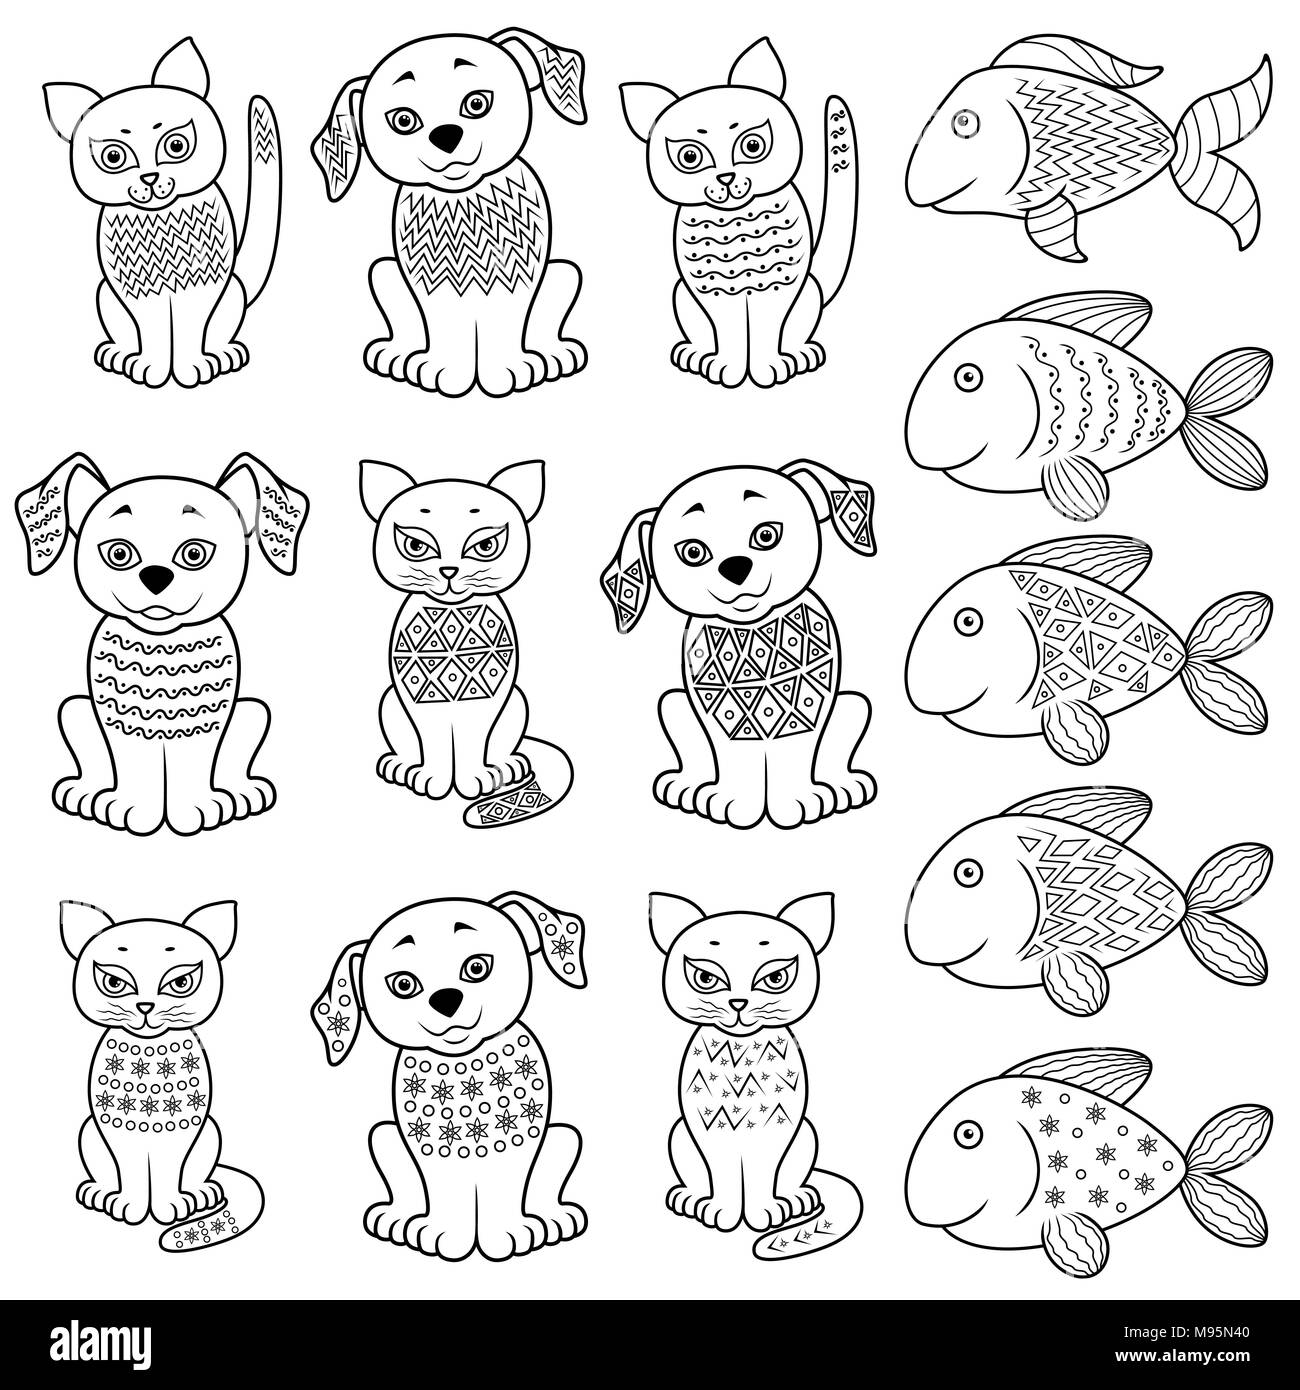 Set of funny cartoon cats, dogs and fishes with various decorative design elements, hand drawing vector artworks Stock Vector